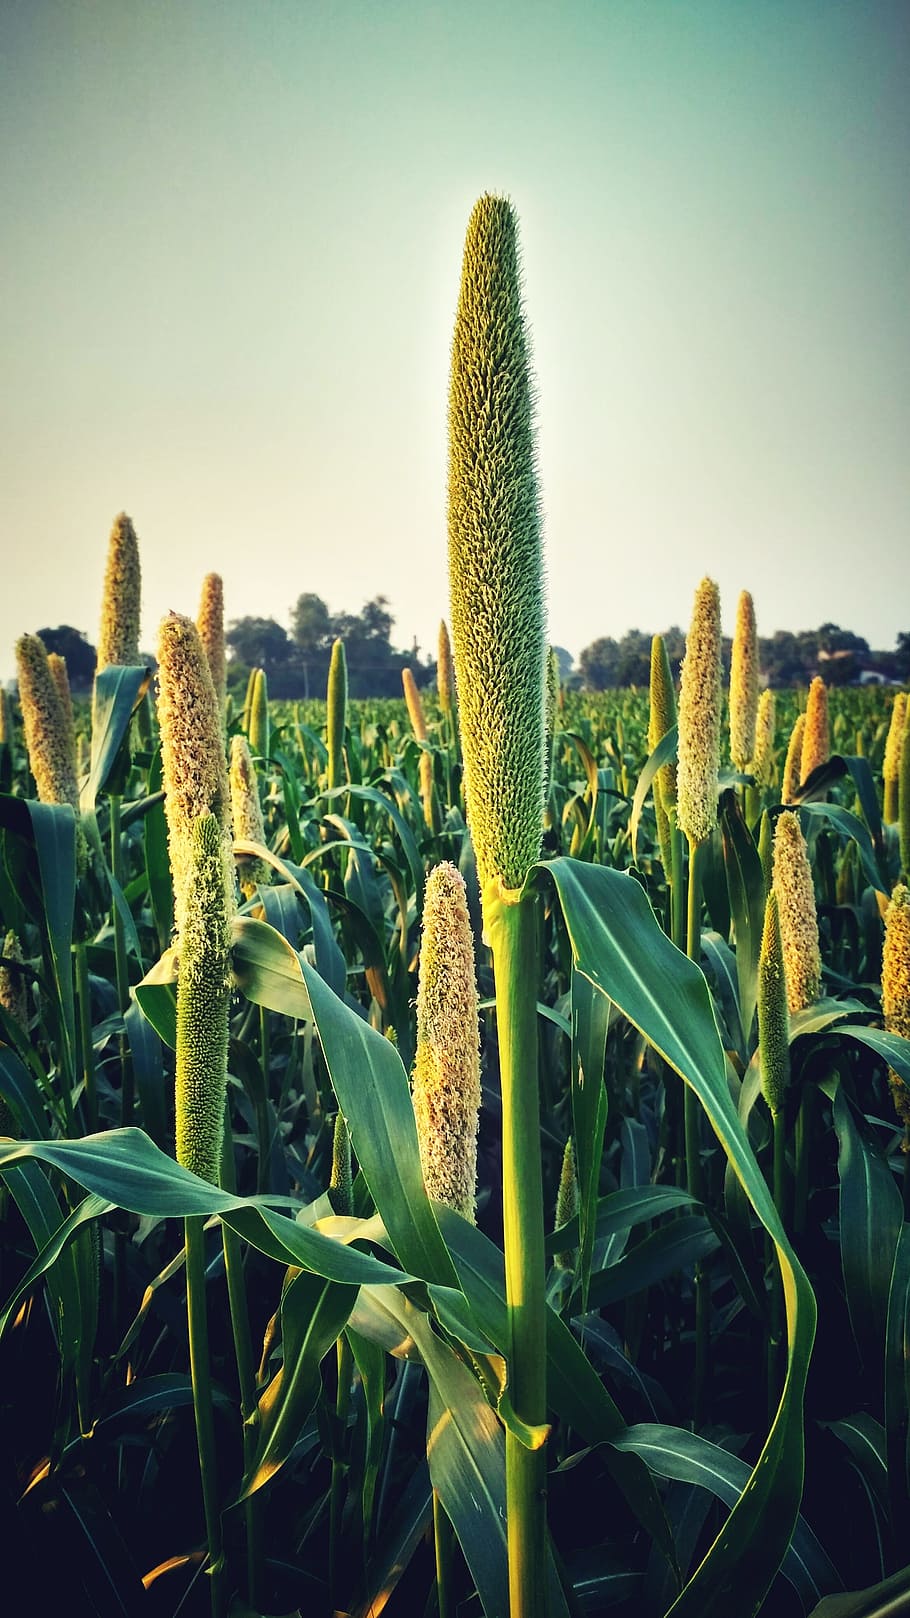 crops, green, farm, pear millet, millet, growth, plant, nature, green color, beauty in nature